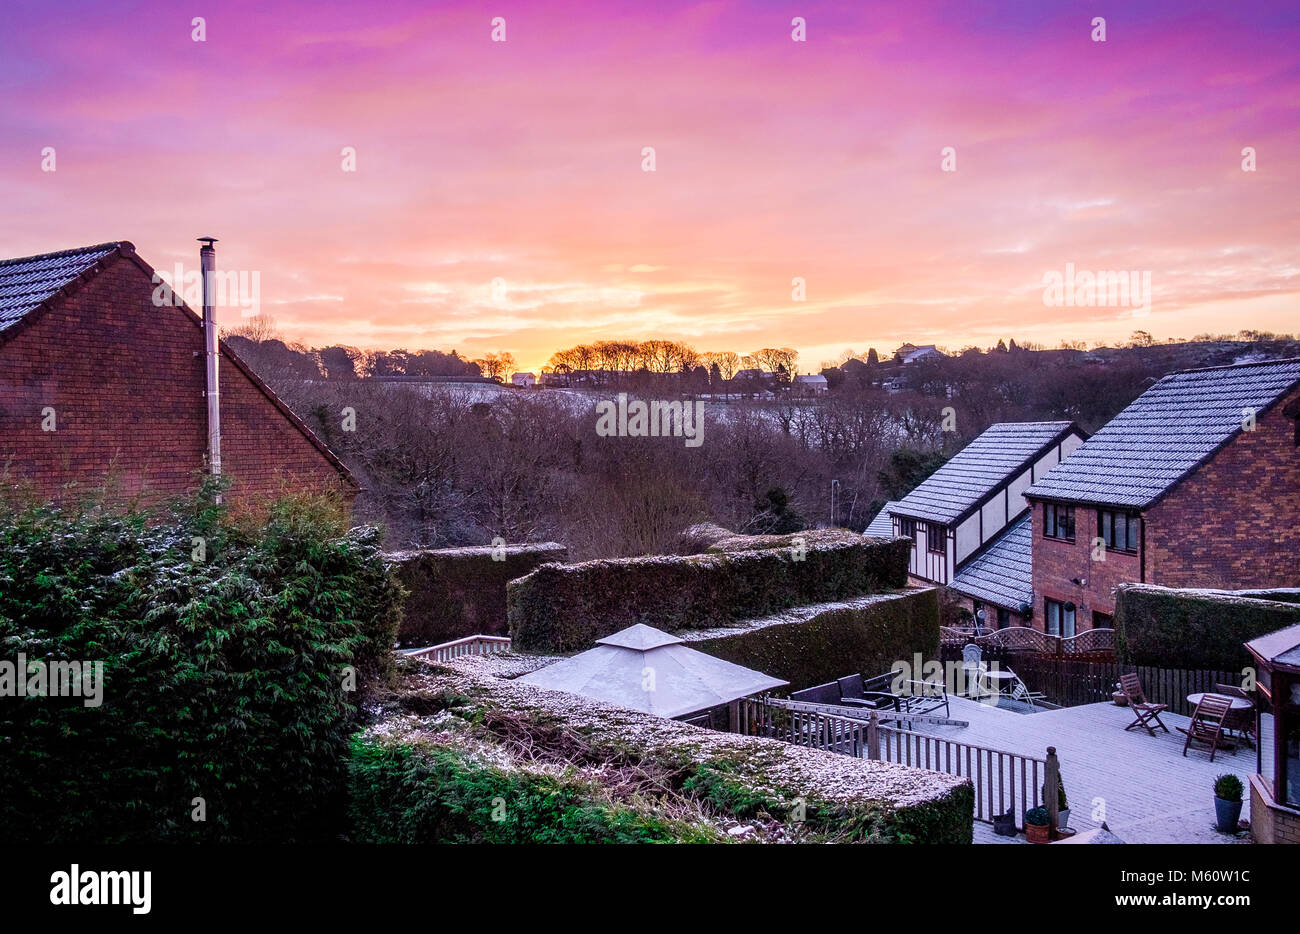 Swansea, Wales, UK. 27th Feb 2018. UK Weather: Suburbia back gardens covered in snow from The Beast in the East, with a vivid sunrise above the hills and trees Credit: Sian Pearce Gordon/Alamy Live News Stock Photo